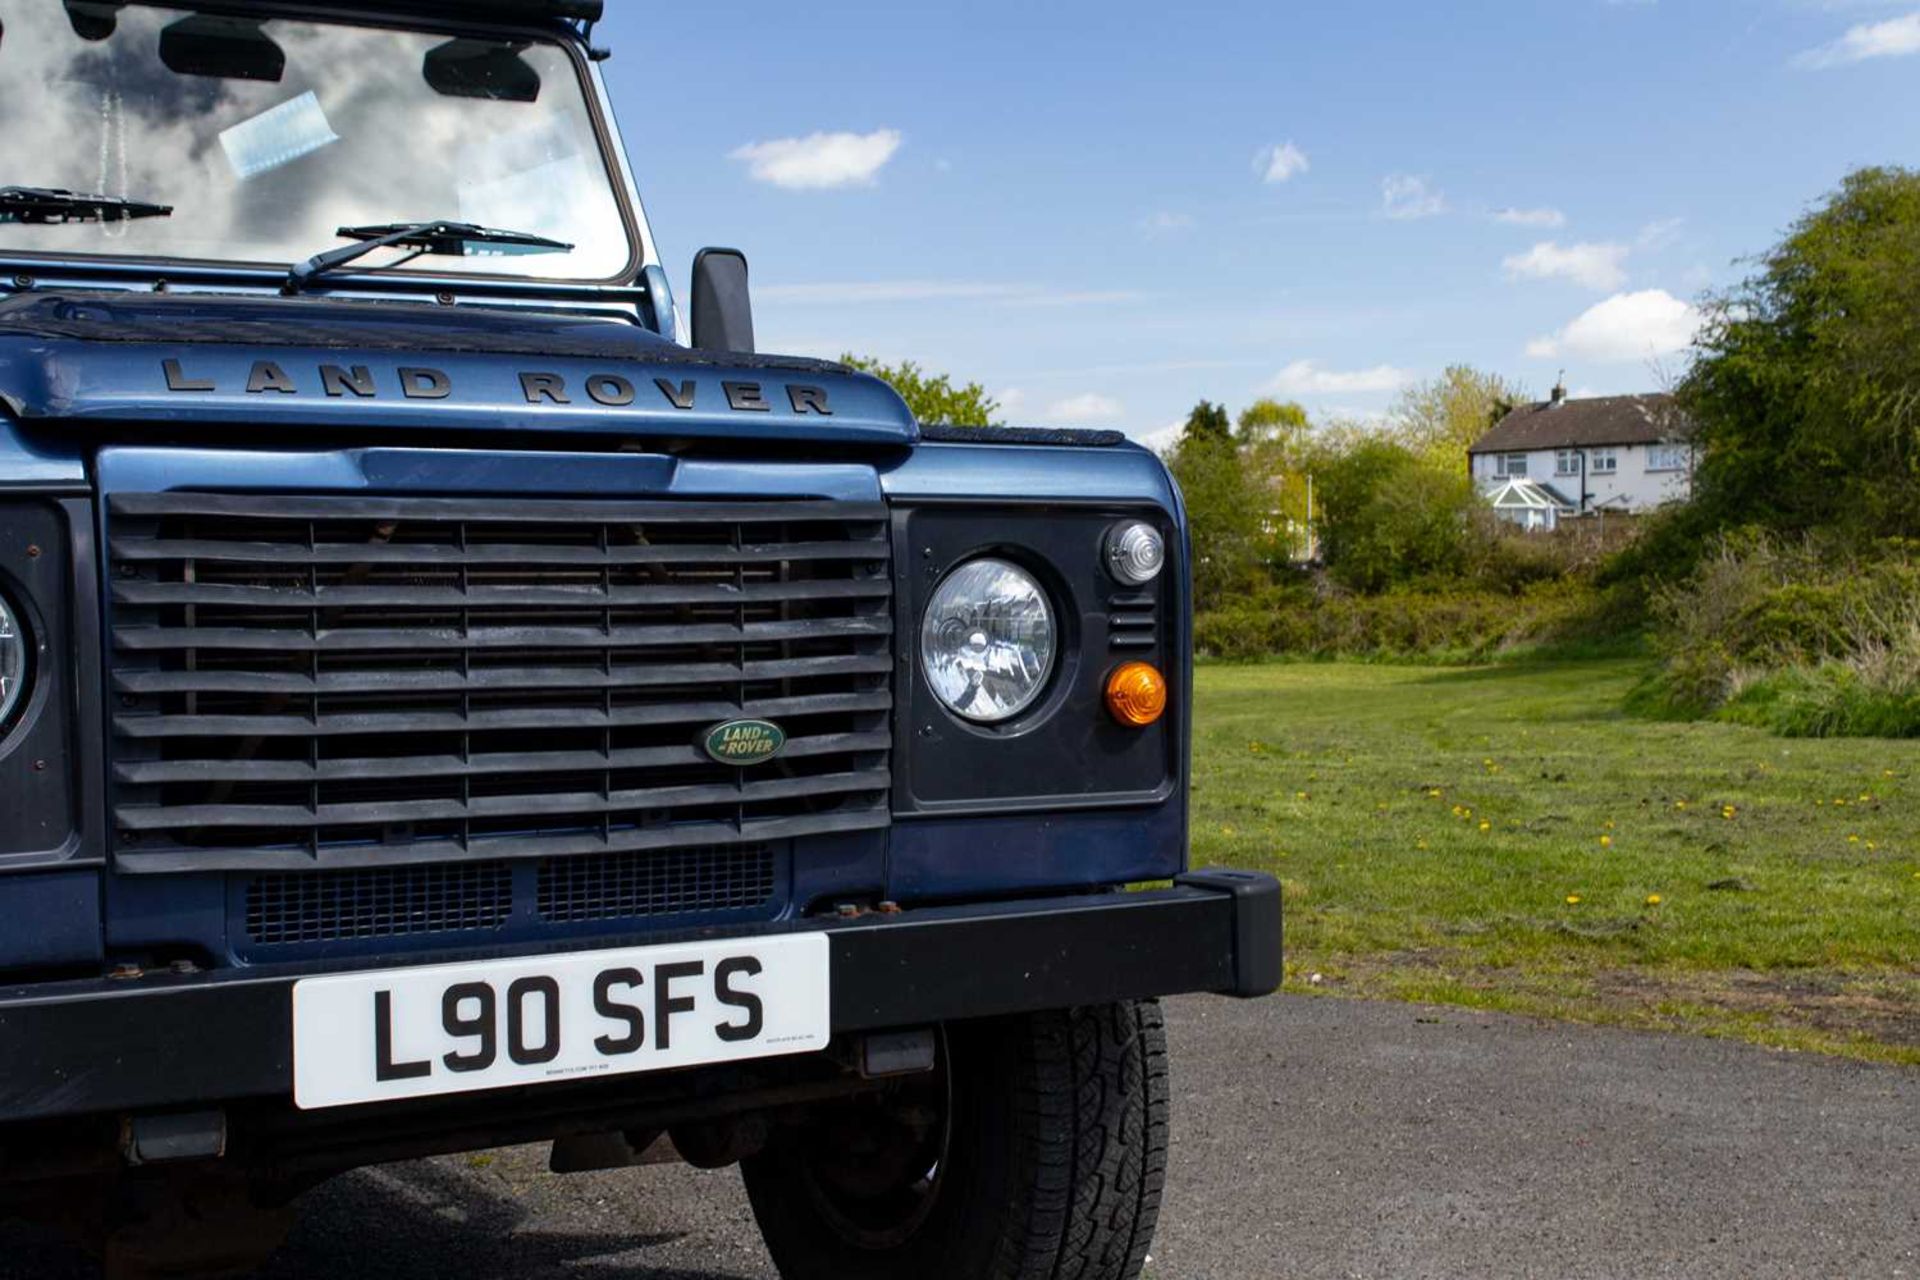 2007 Land Rover Defender 90 County  Powered by the 2.4-litre TDCi unit and features numerous tastefu - Image 18 of 76